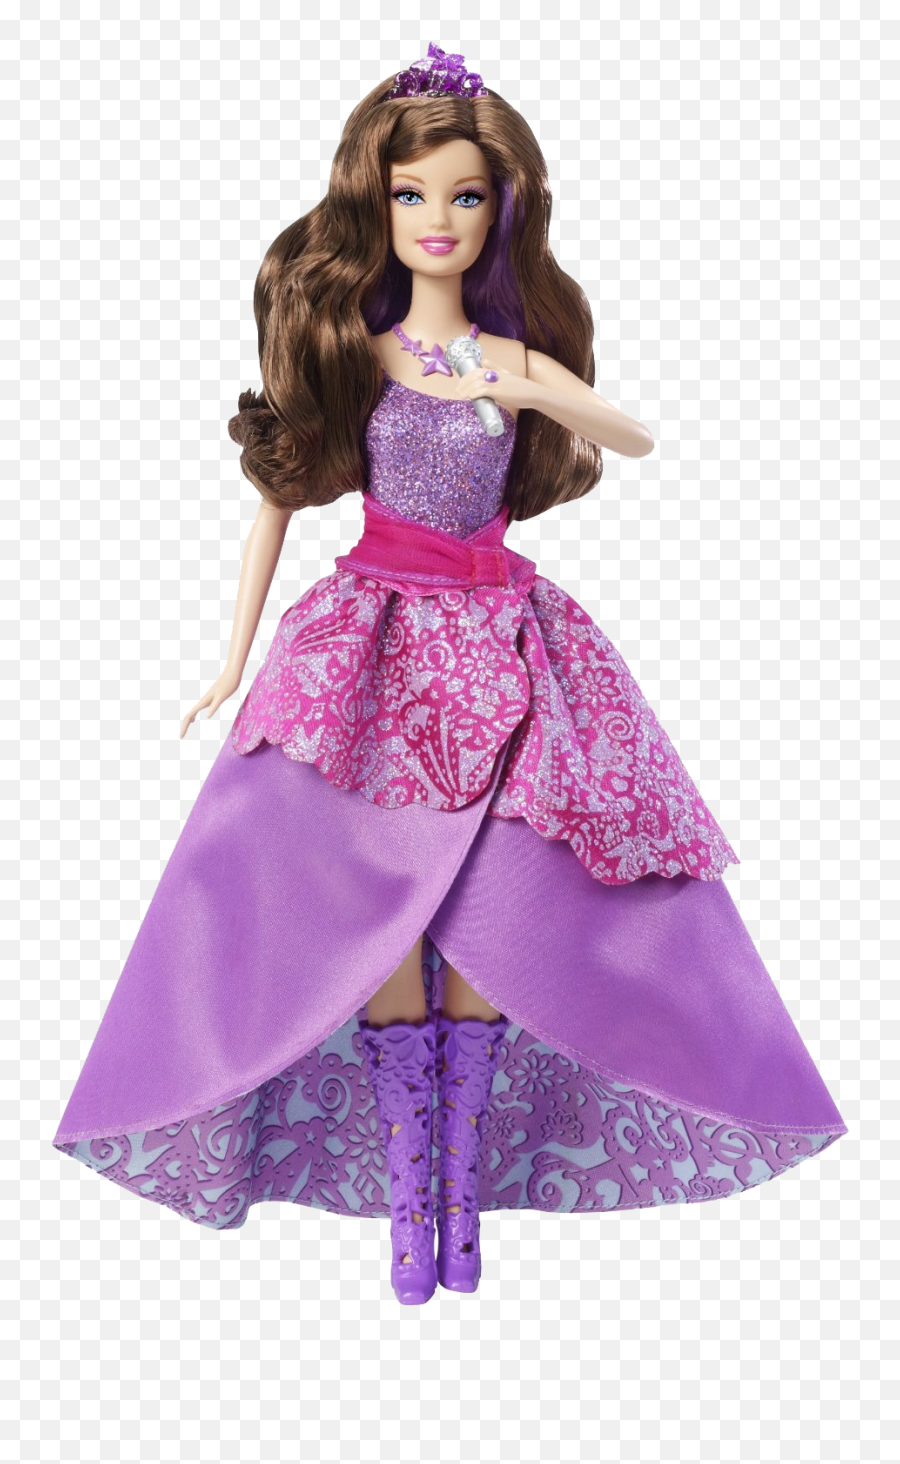 Download Doll Png Free 209 - Barbie Doll Princess And The Popstar,Doll Png